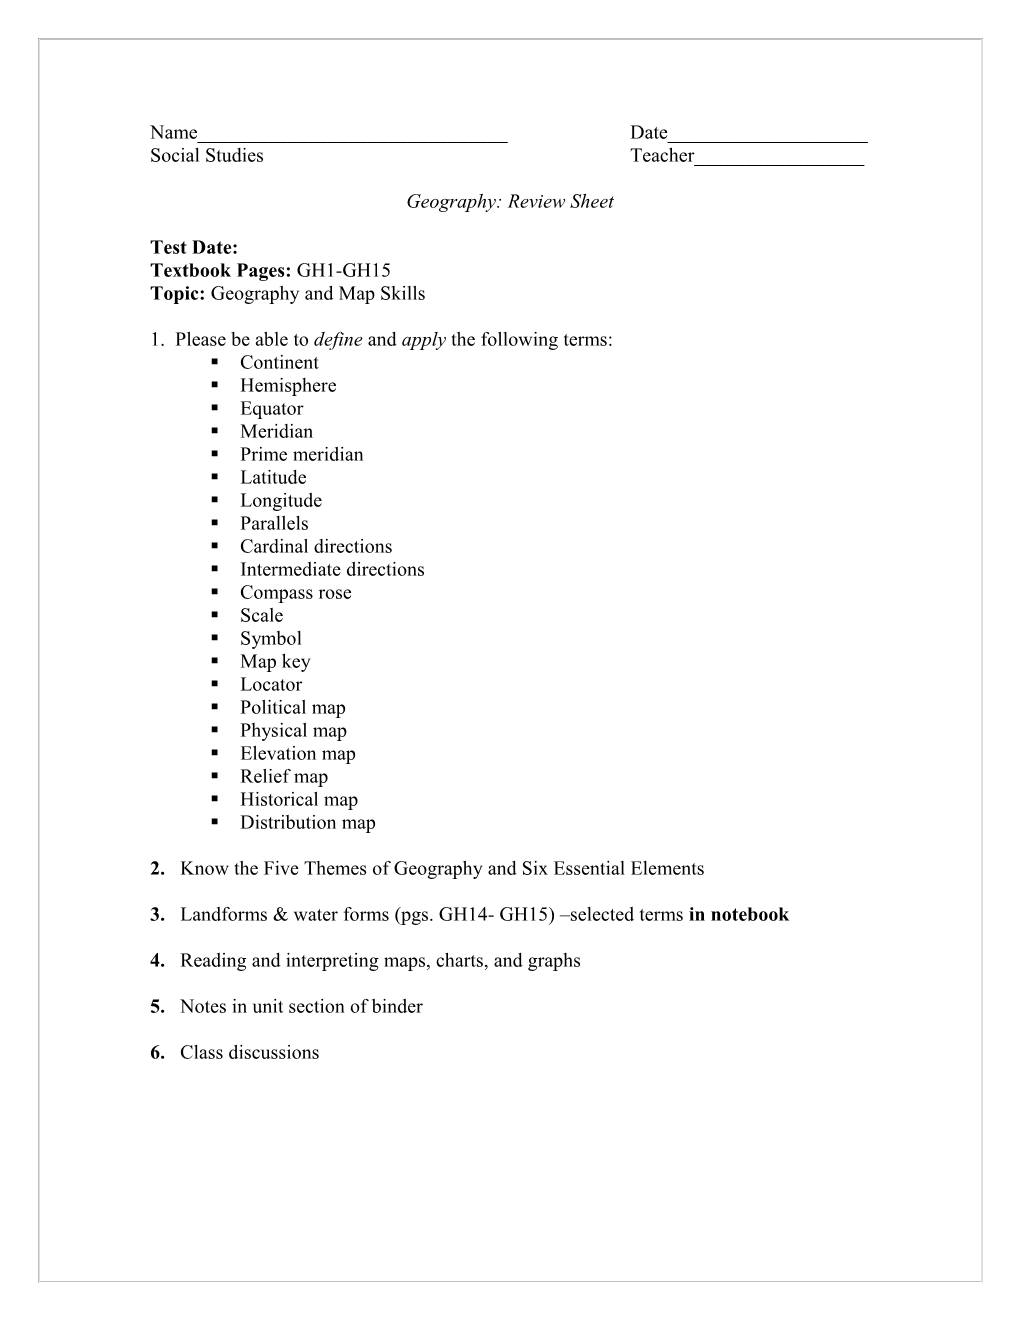 Geography Review Sheet